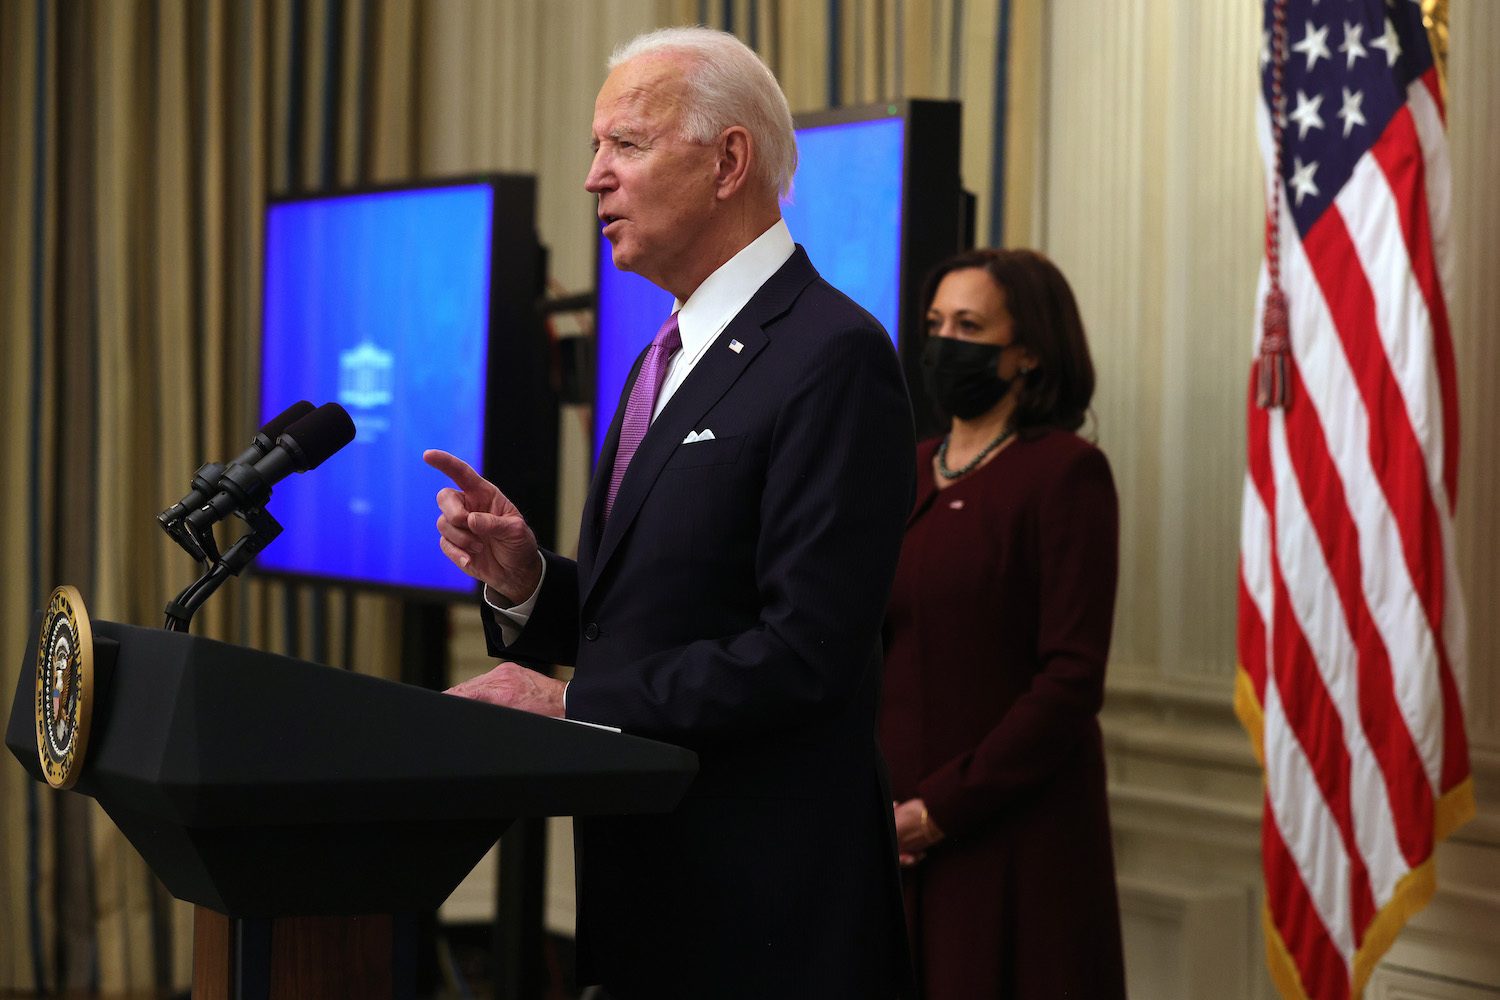 WASHINGTON, DC - JANUARY 21: U.S. President Joe Biden speaks as Vice President Kamala Harris looks on during an event in the State Dining Room of the White House January 21, 2021 in Washington, DC. President Biden delivered remarks on his administration’s COVID-19 response, and signed executive orders and other presidential actions. (Photo by Alex Wong/Getty Images)